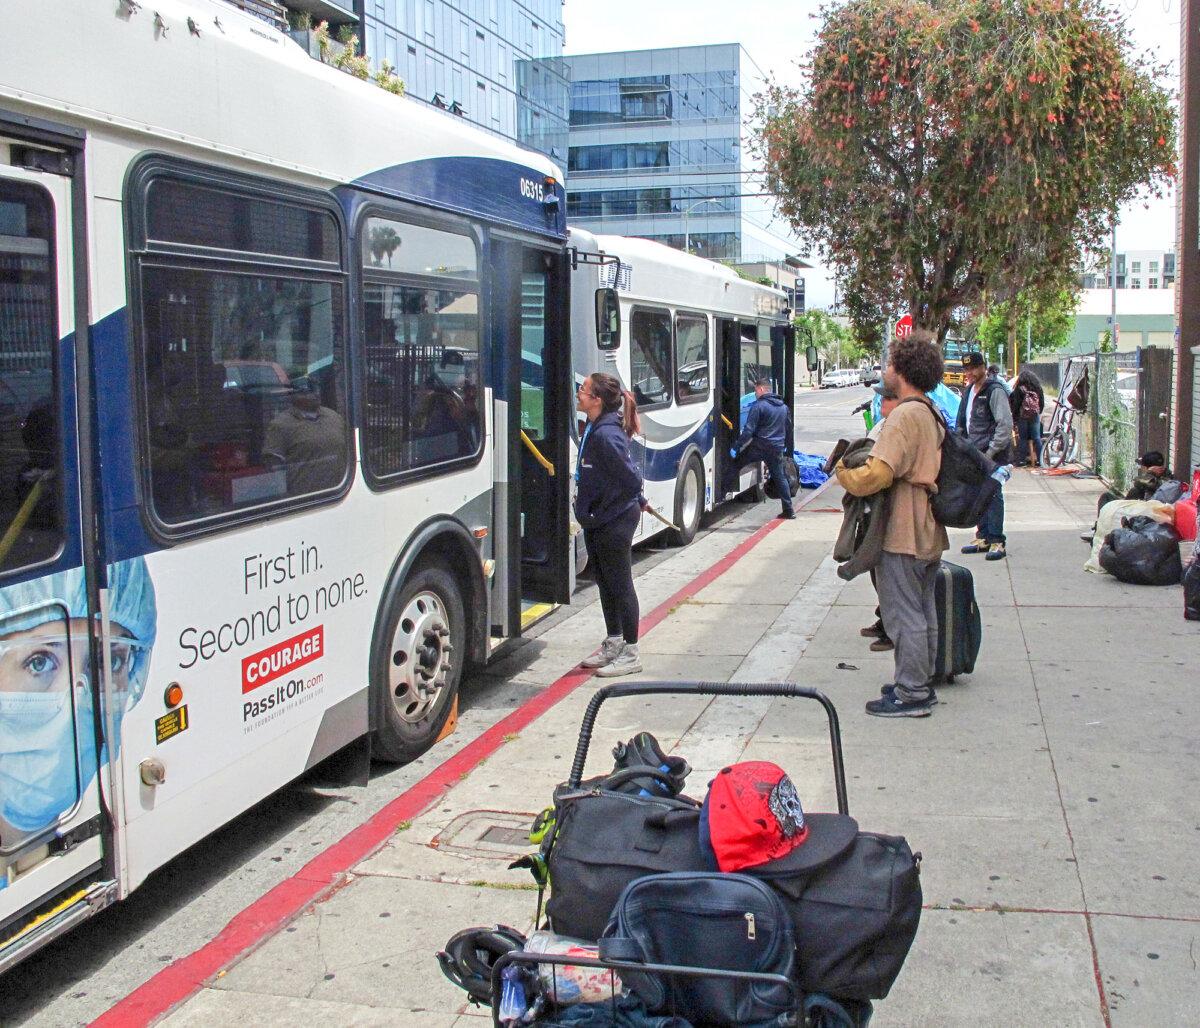 Homeless people get on a bus to go to a hotel as part of the Inside Safe program in Los Angeles. (Courtesy of Keith Johnson)